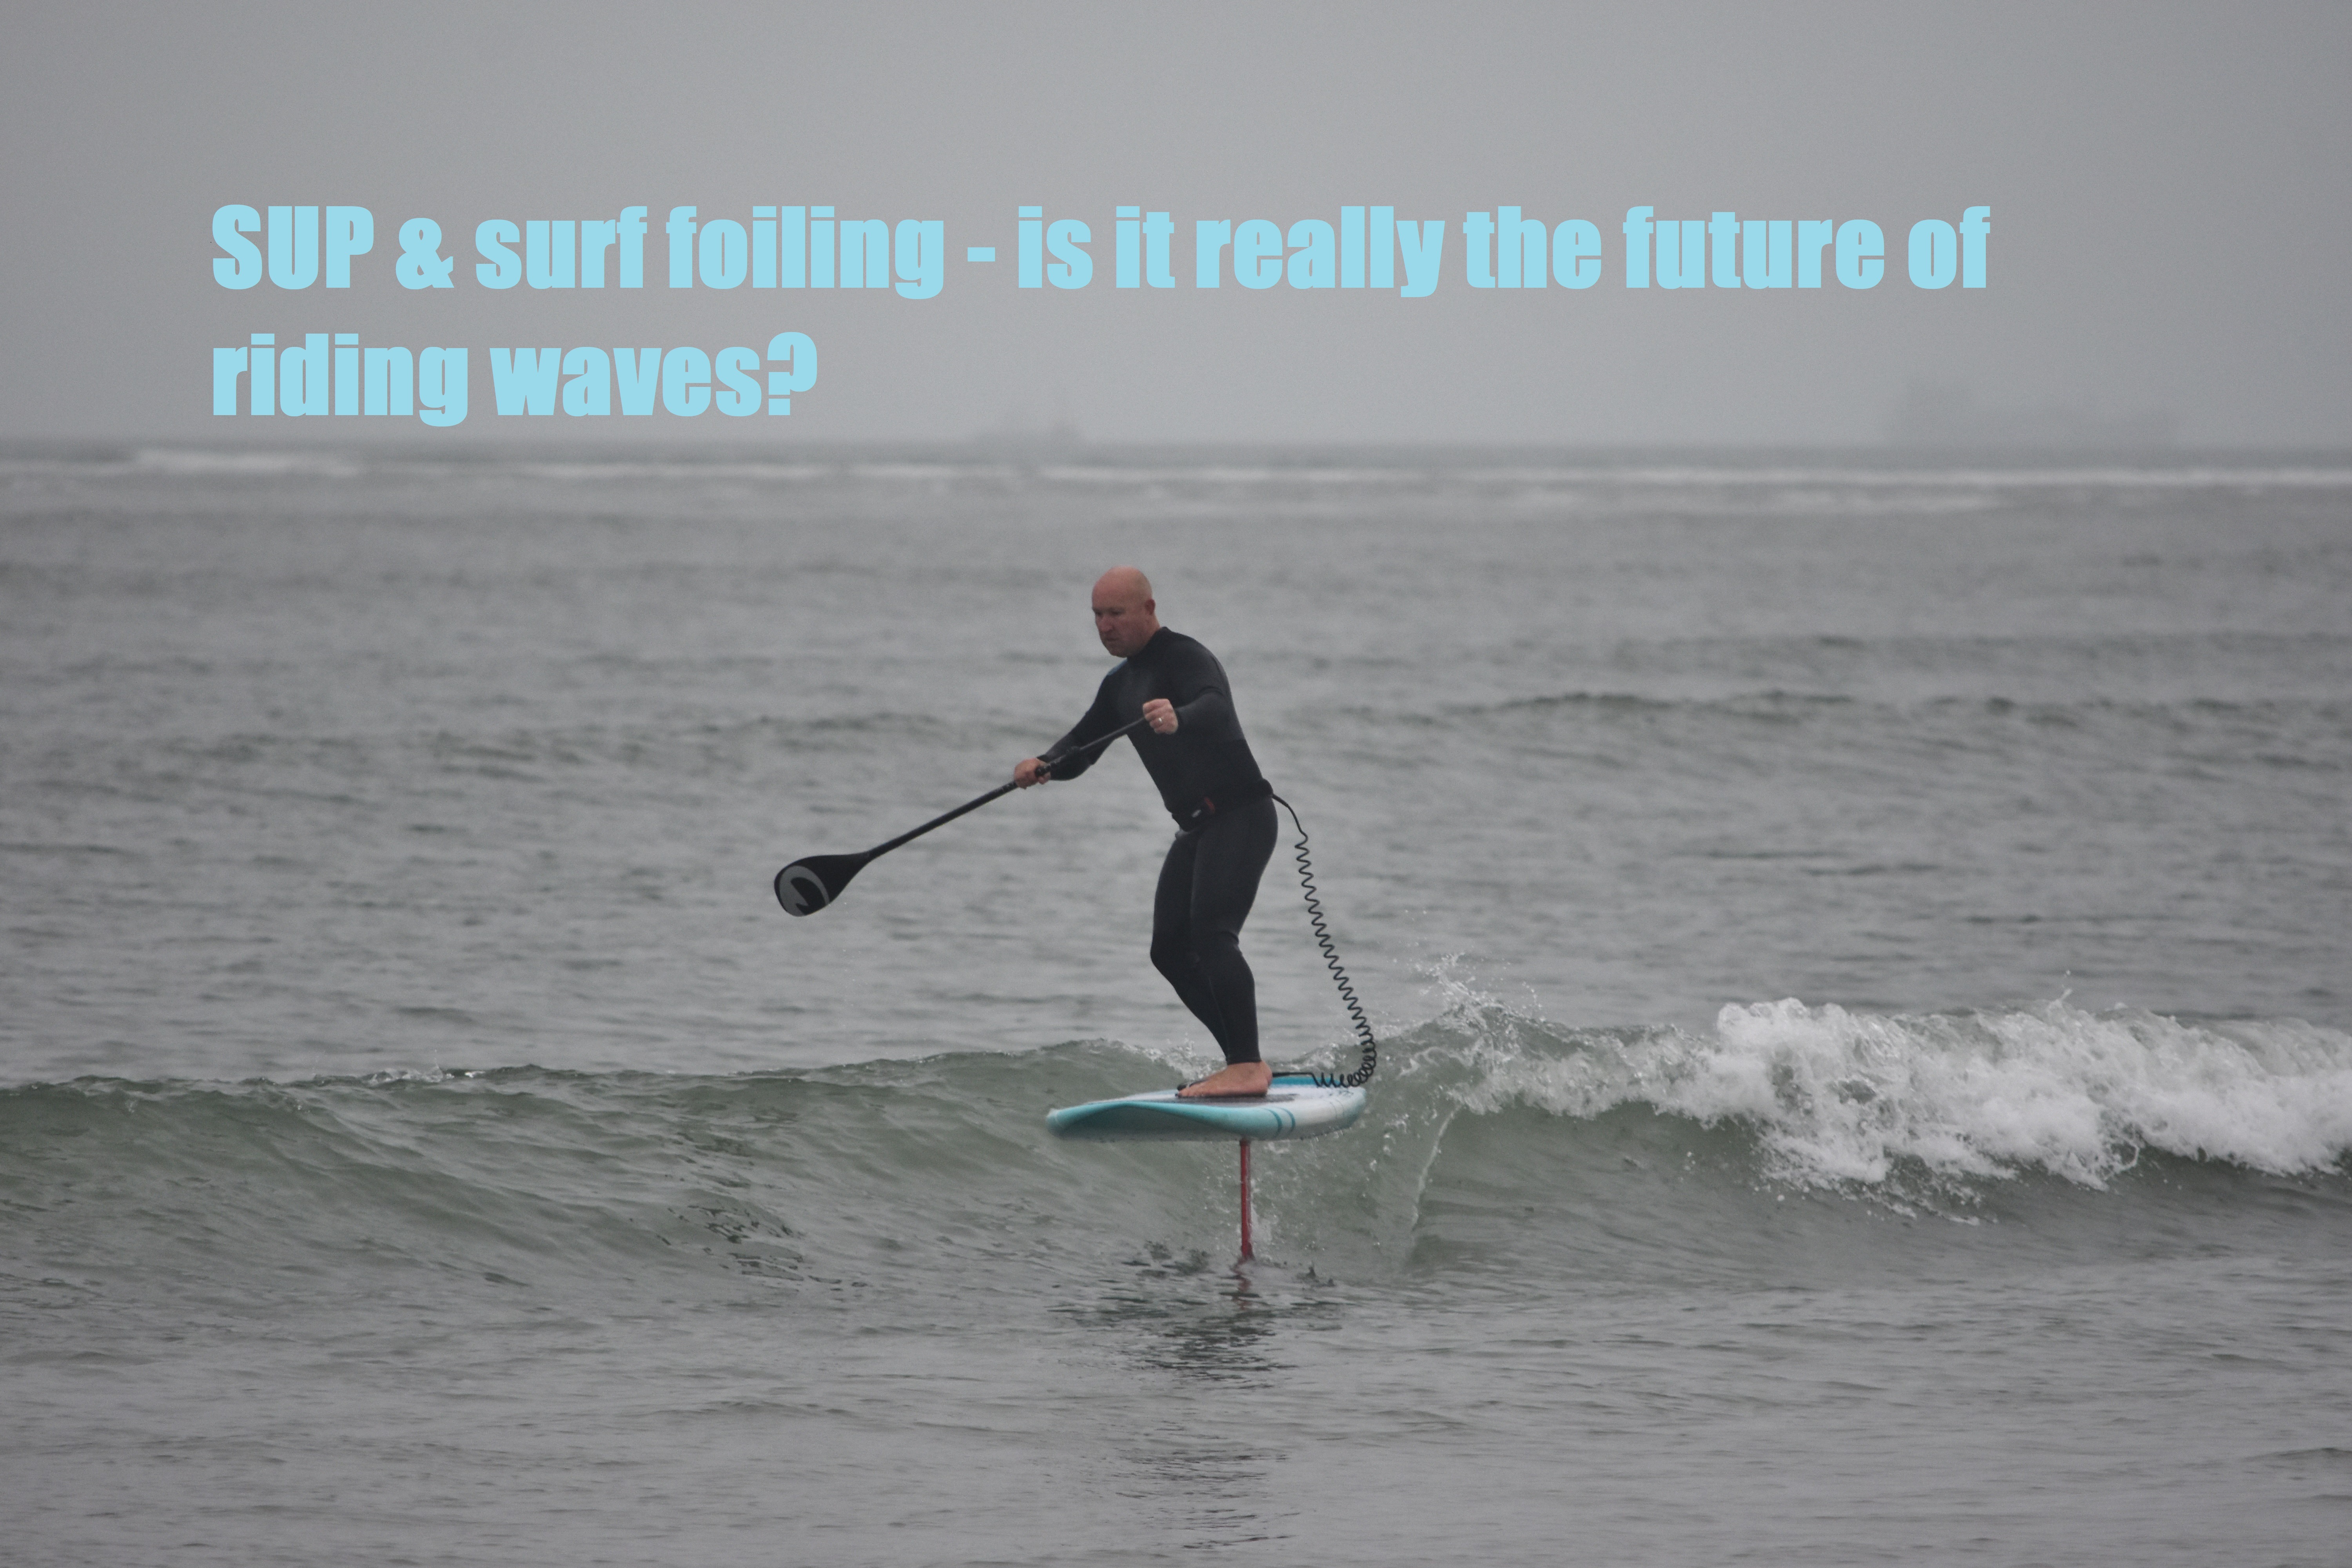 SUP & surf foiling - is it really the future of riding waves